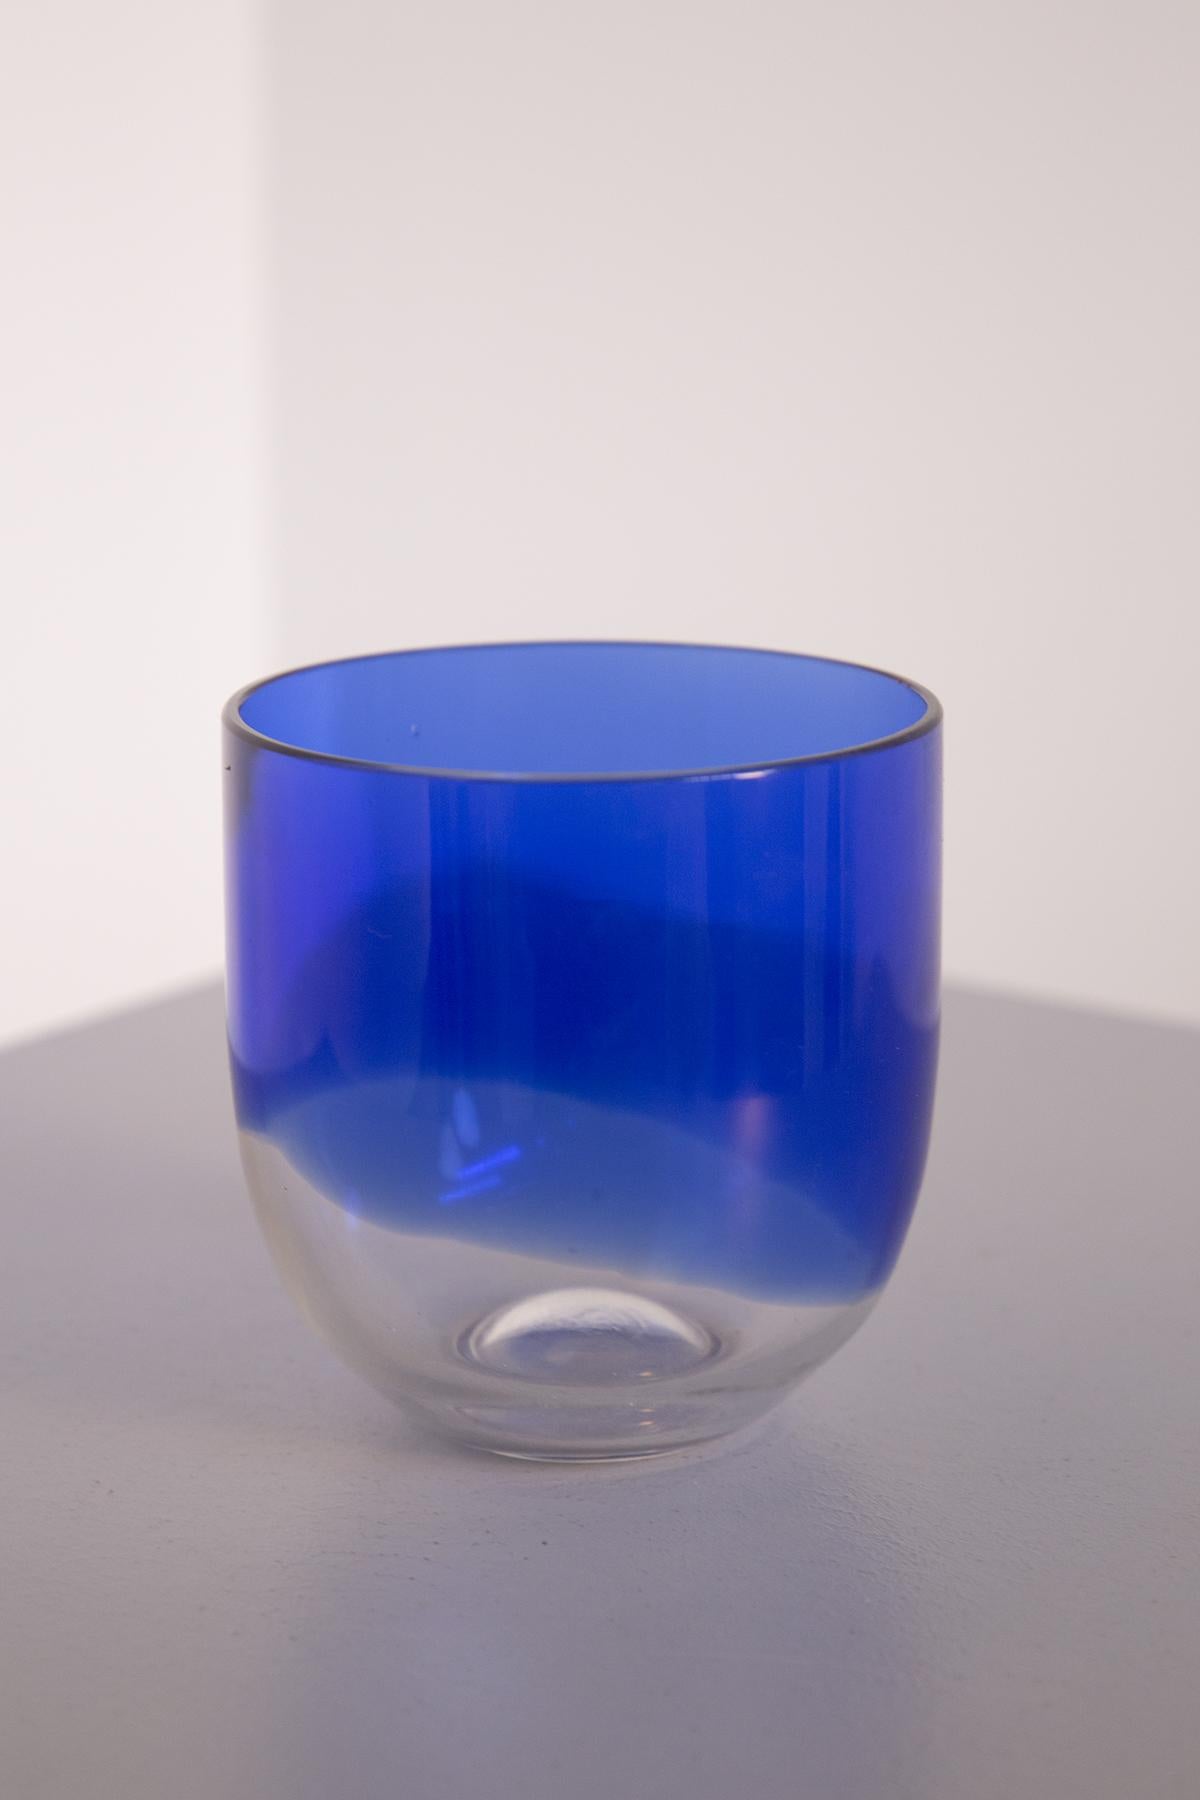 Late 20th Century Tapio Wirkkala Vintage Blue and Transparent Glass Vase for Venini For Sale